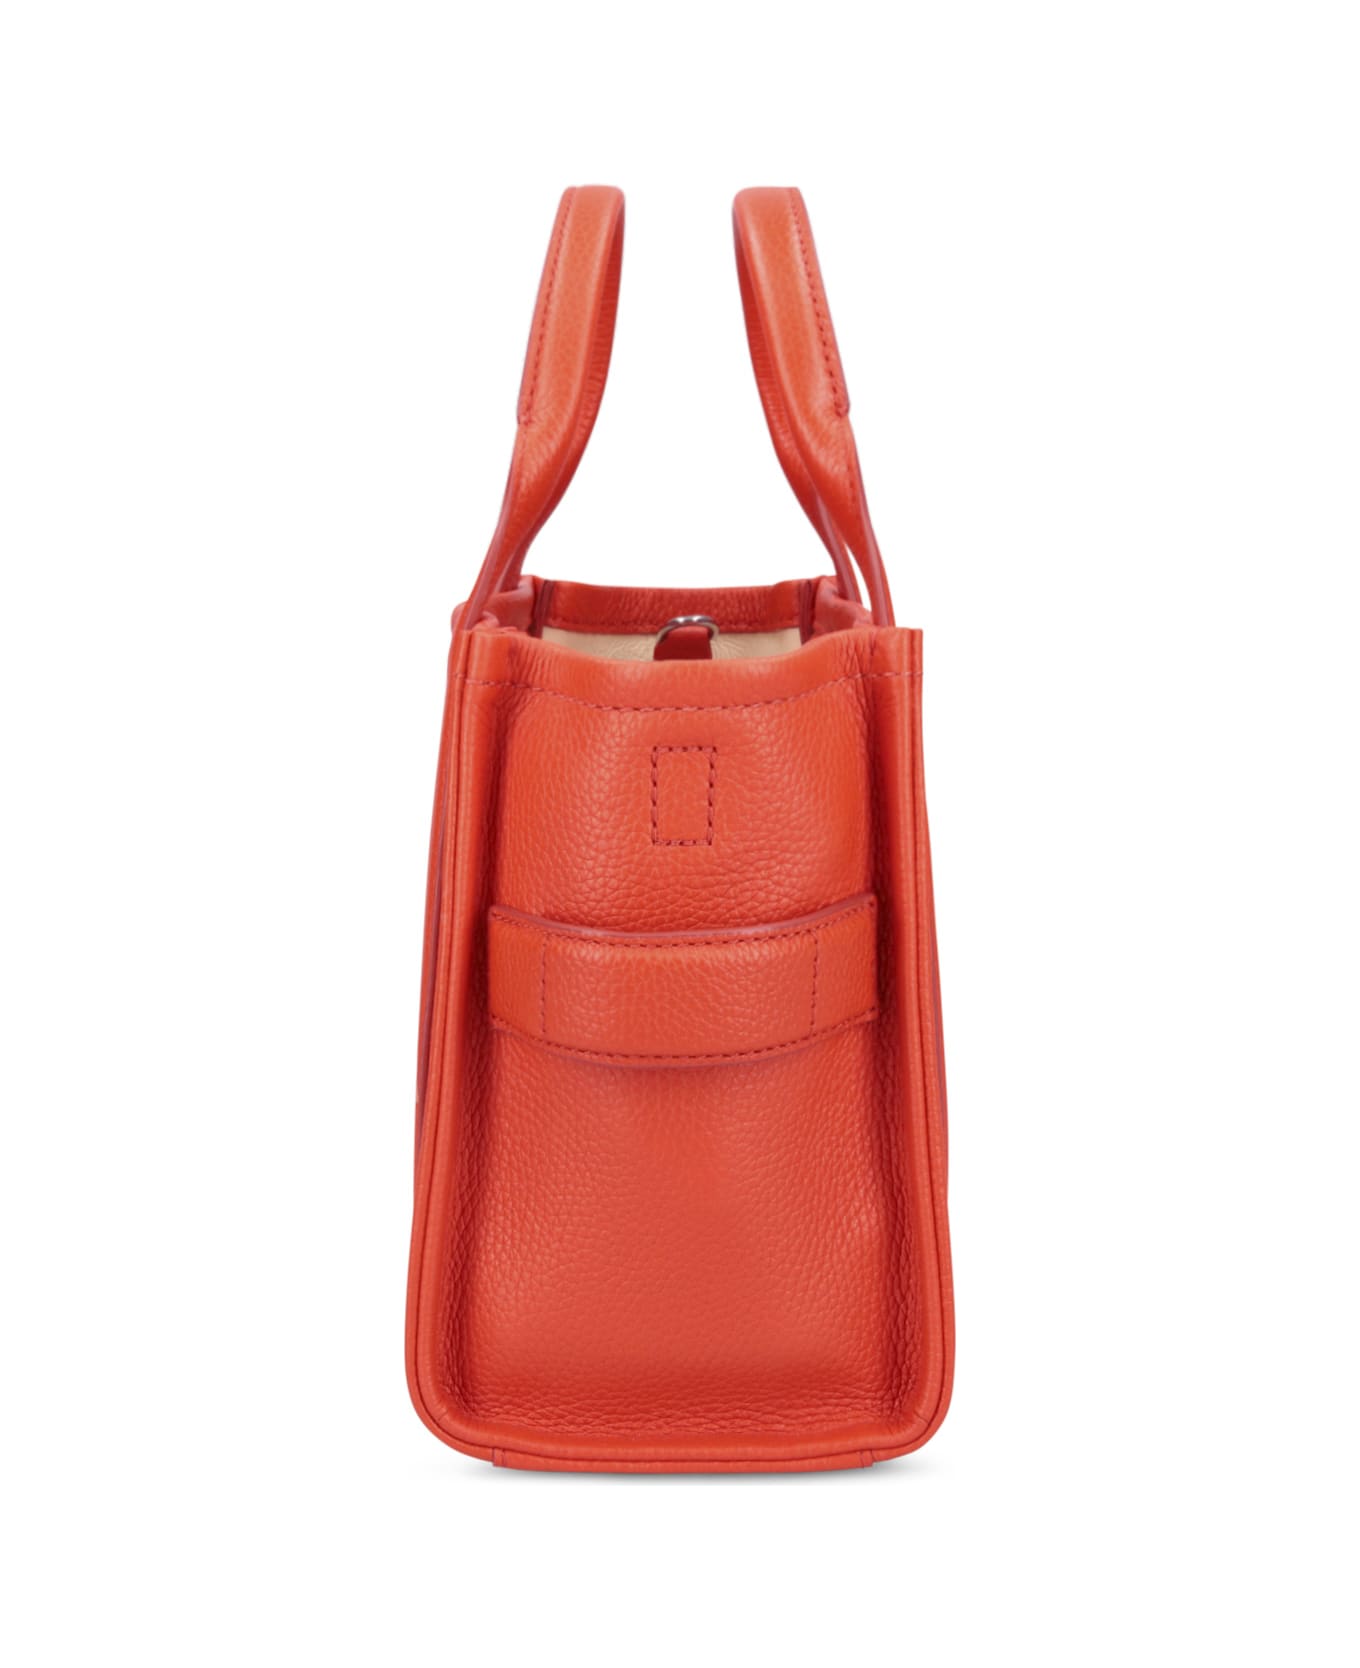 Marc Jacobs The Small Tote Bag - Orange トートバッグ